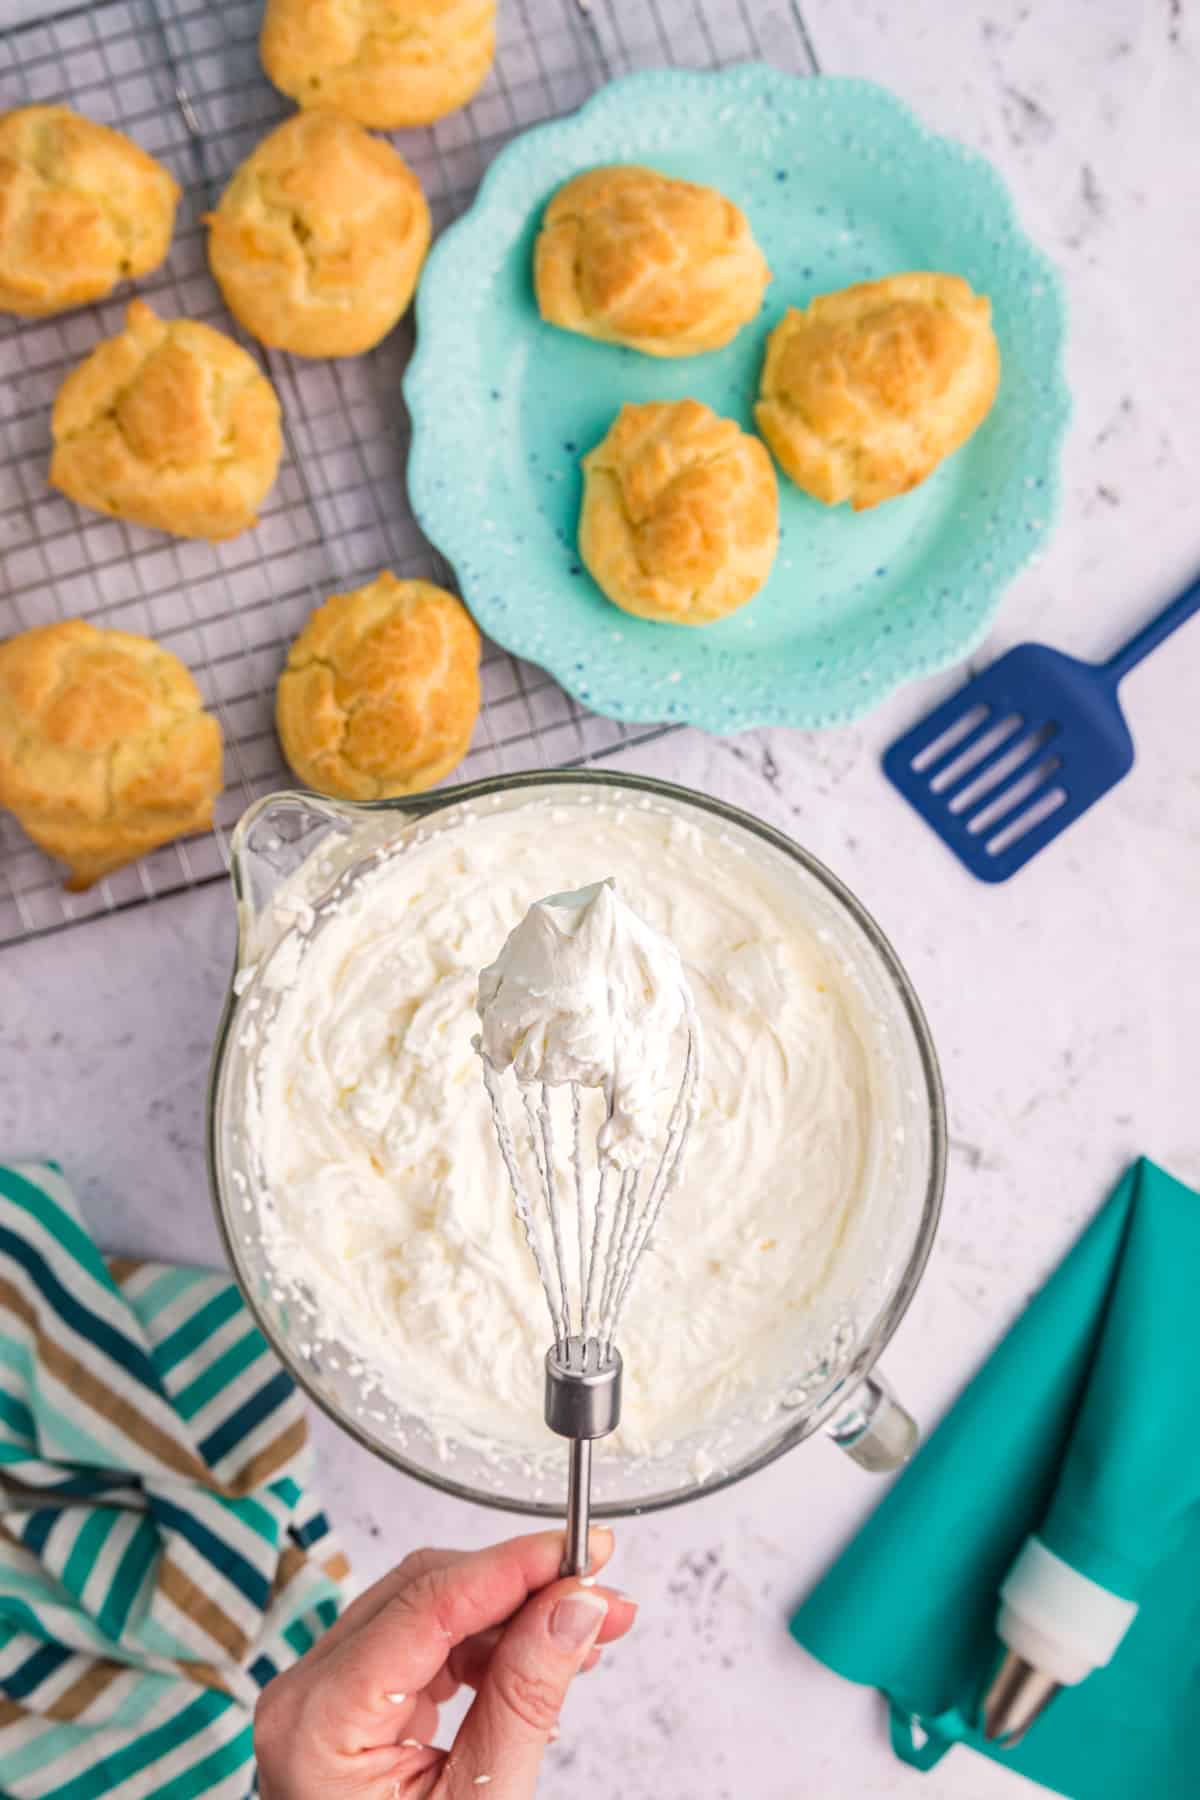 Whipped cream is being whisked in a bowl next to freshly baked puffs. 